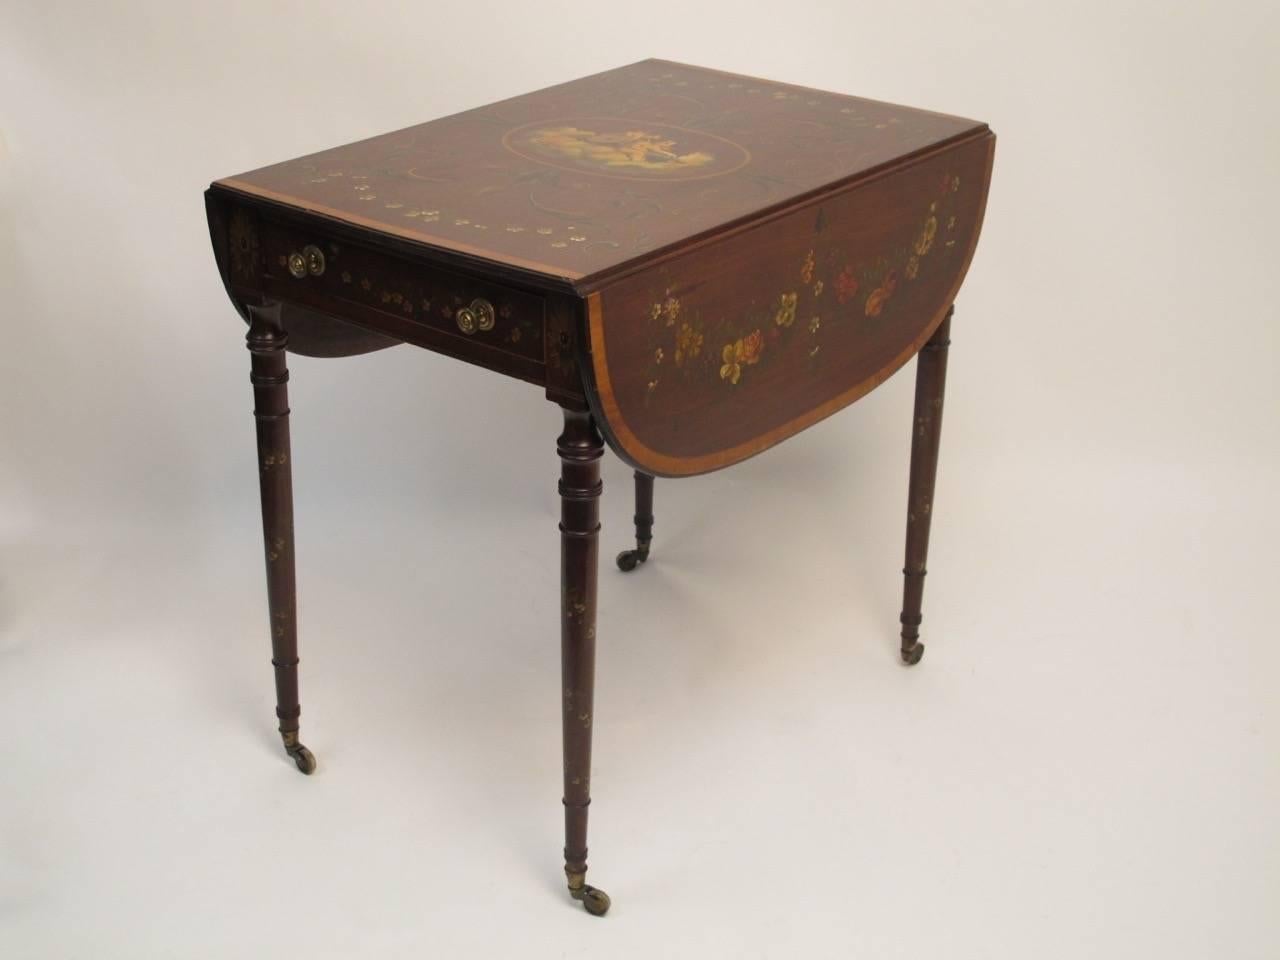 19th century mahogany pembroke table with hand painted floral decoration, satinwood banding around the top and two drop leaves. Each leaf measuring 10.5 inches wide. England, circa 1880.